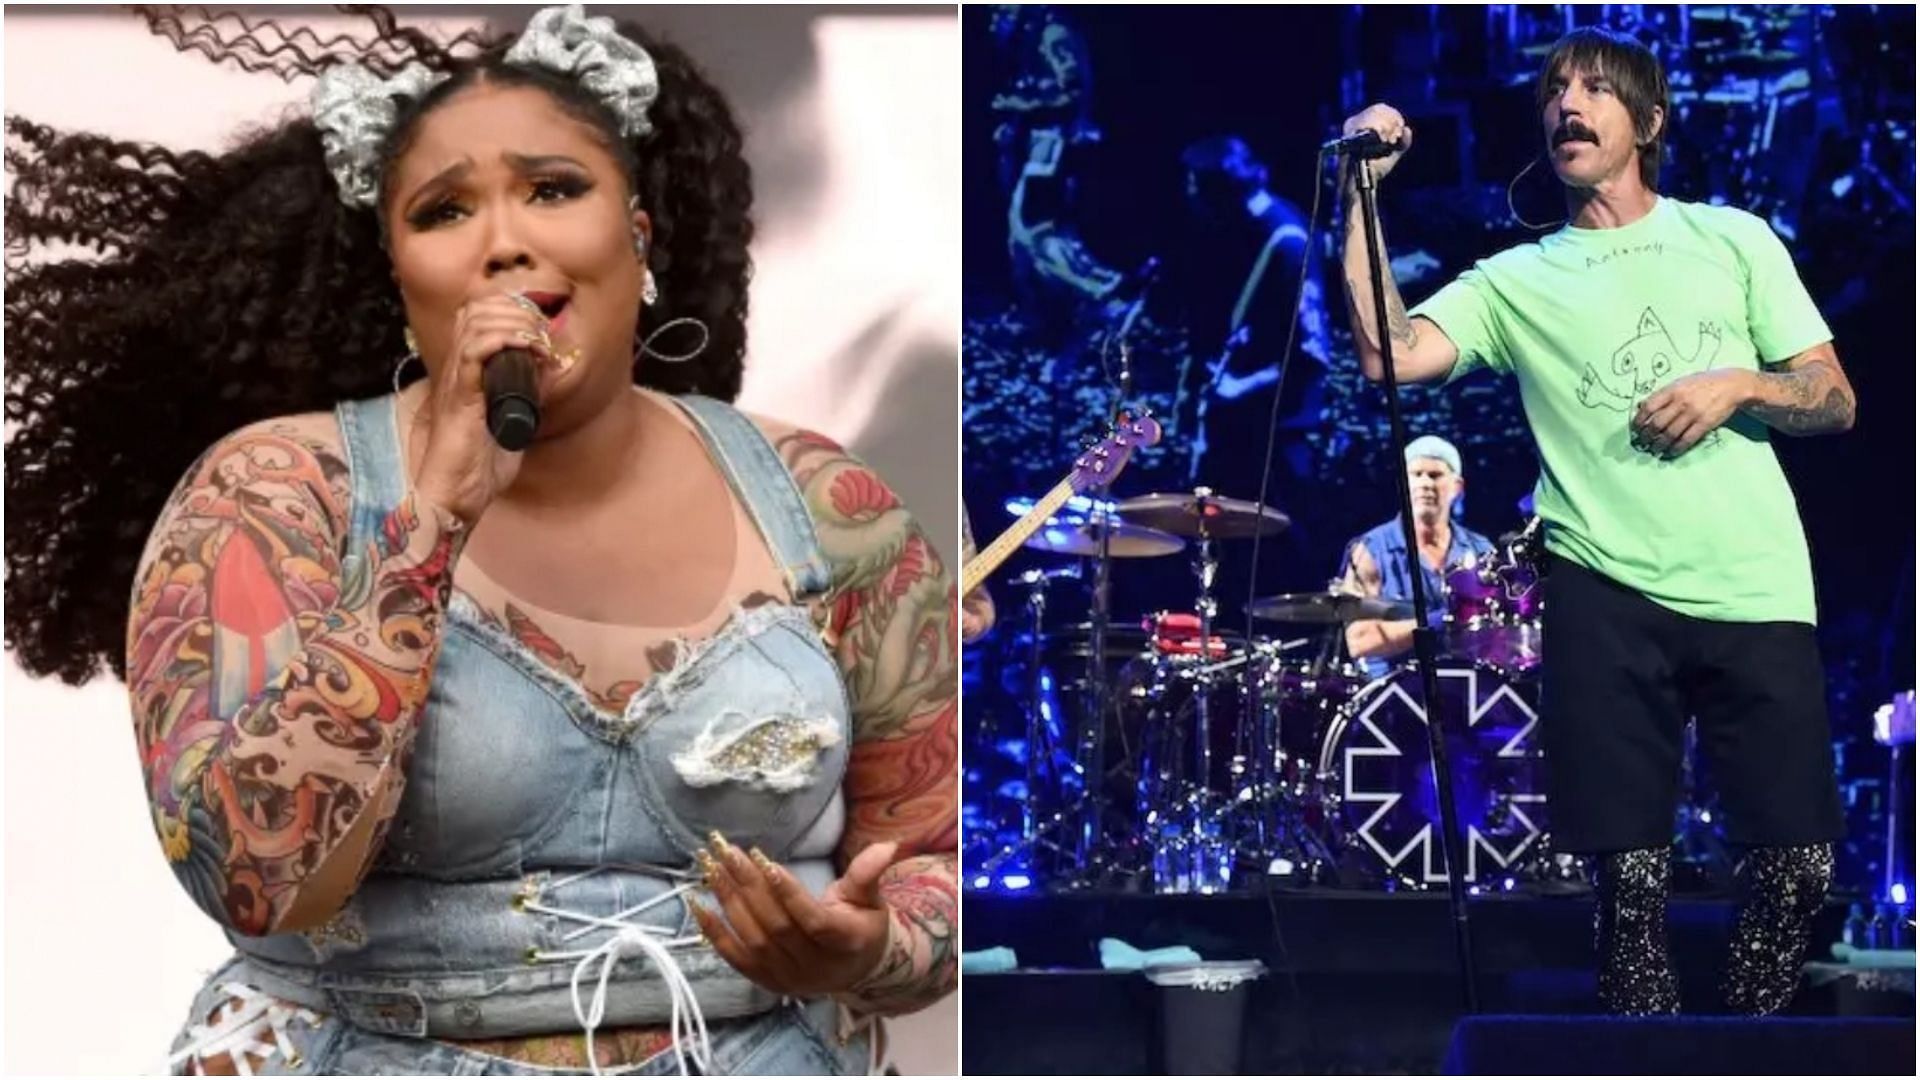 Mad Cool Festival has announced its lineup for 2023. (Images via Getty)